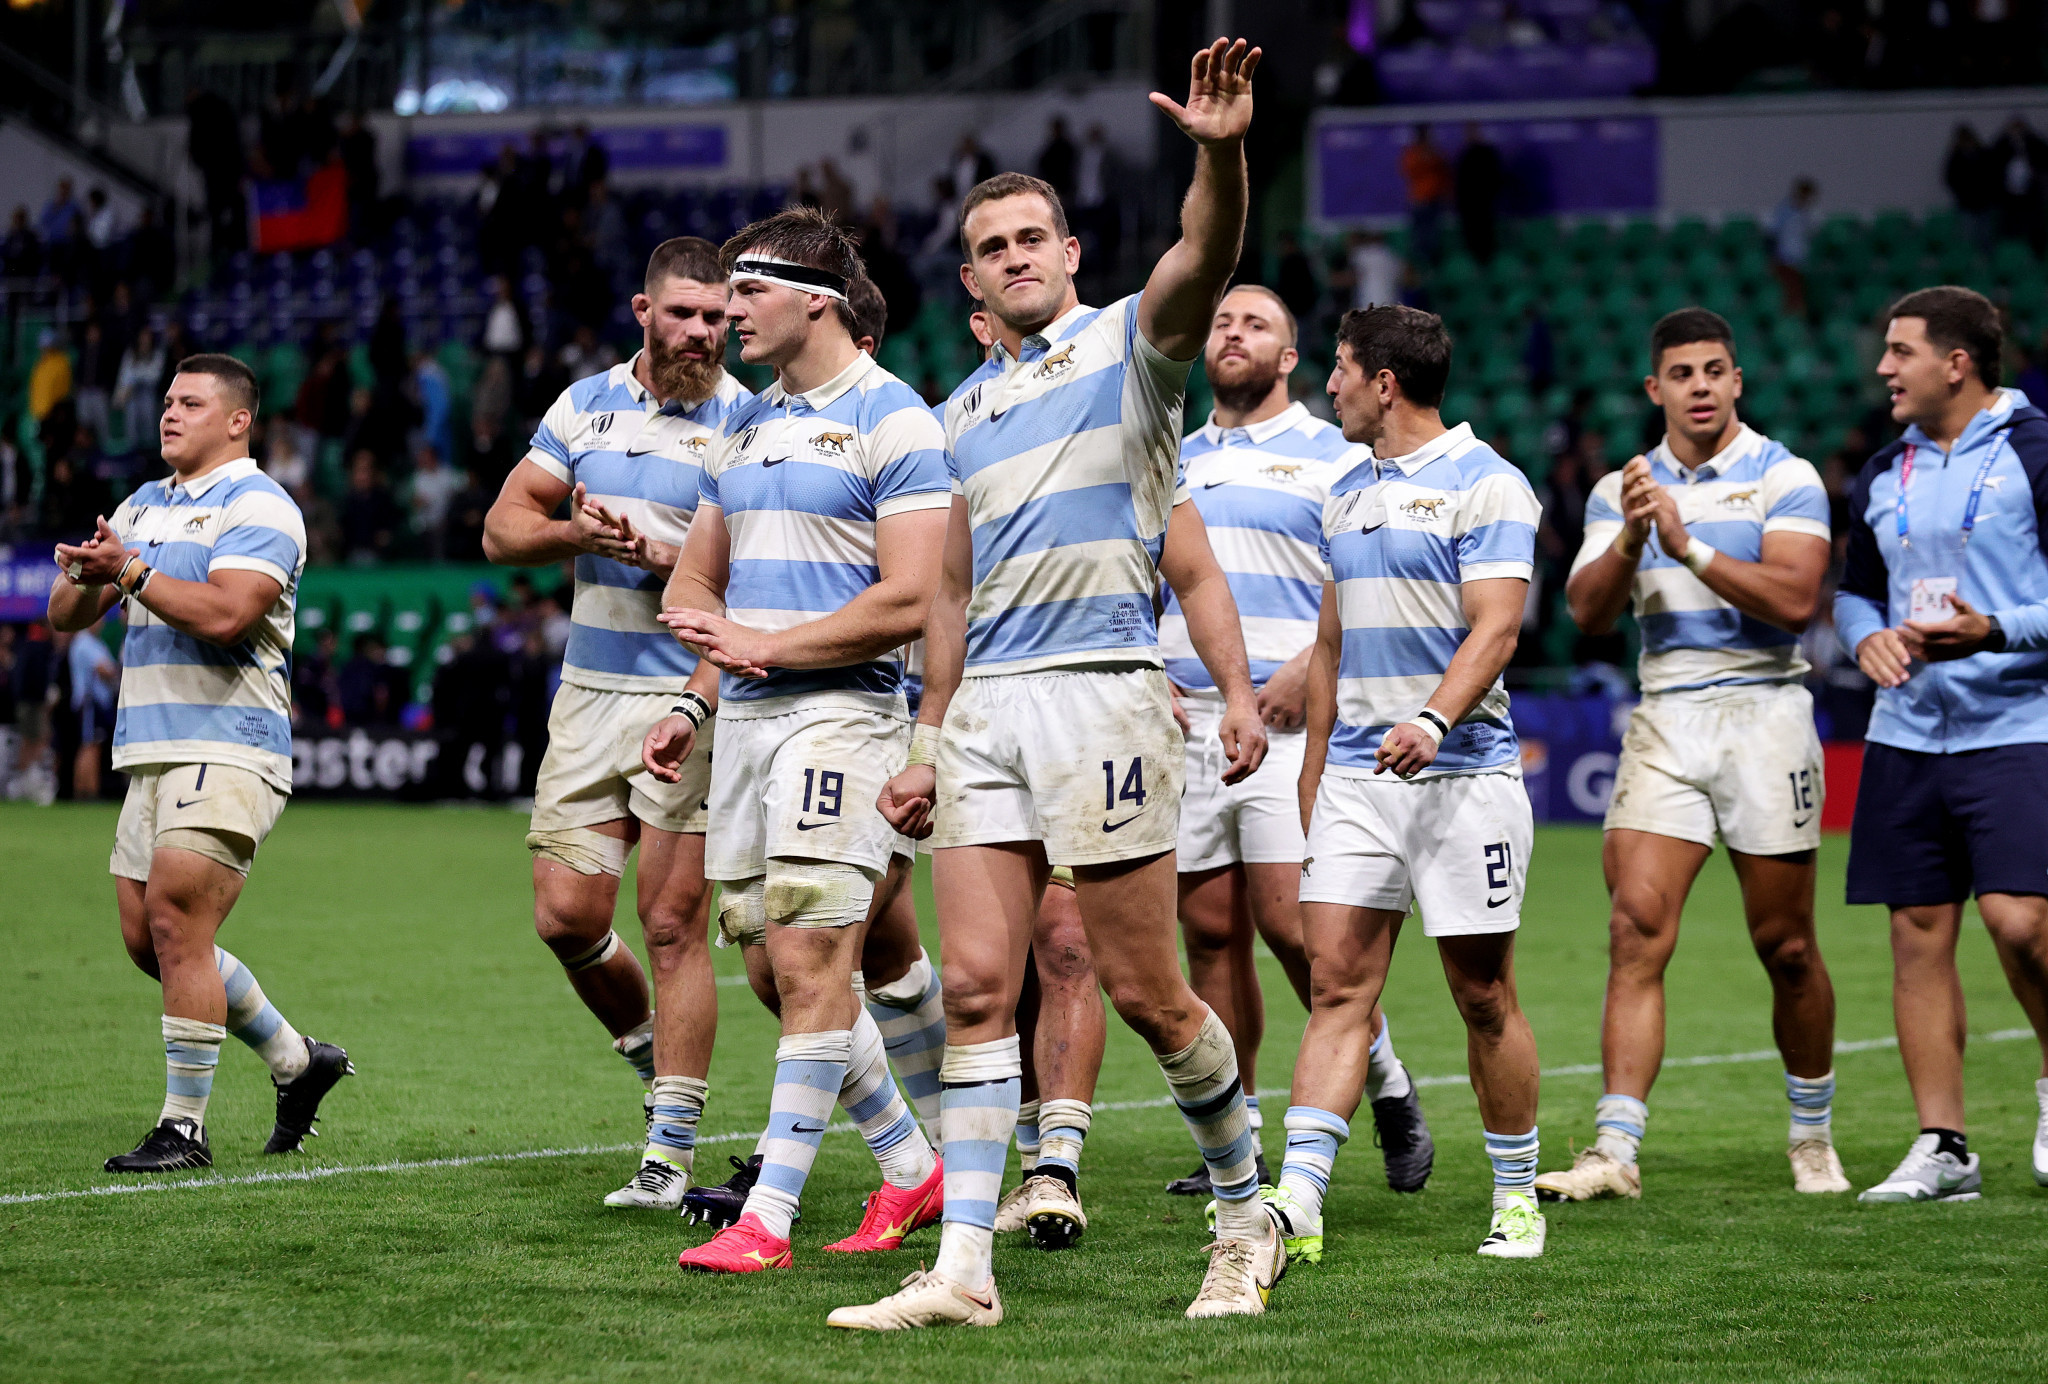 Argentina's first win of the Rugby World Cup in France keeps their hopes of reaching the quarter-finals alive ©Getty Images